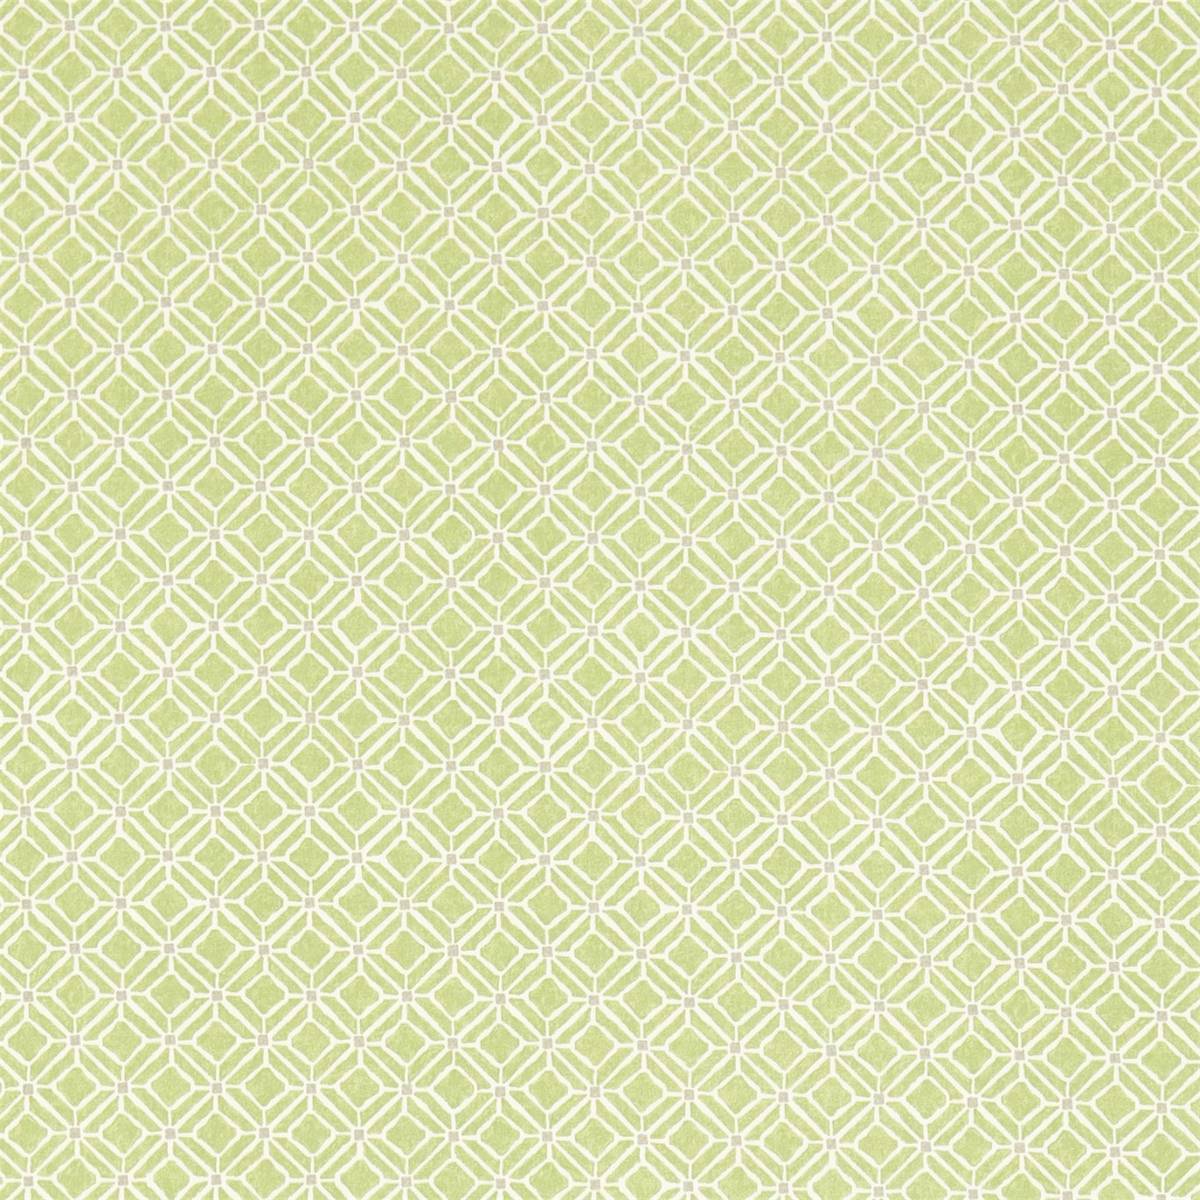 Fretwork Apple/Taupe Fabric by Sanderson